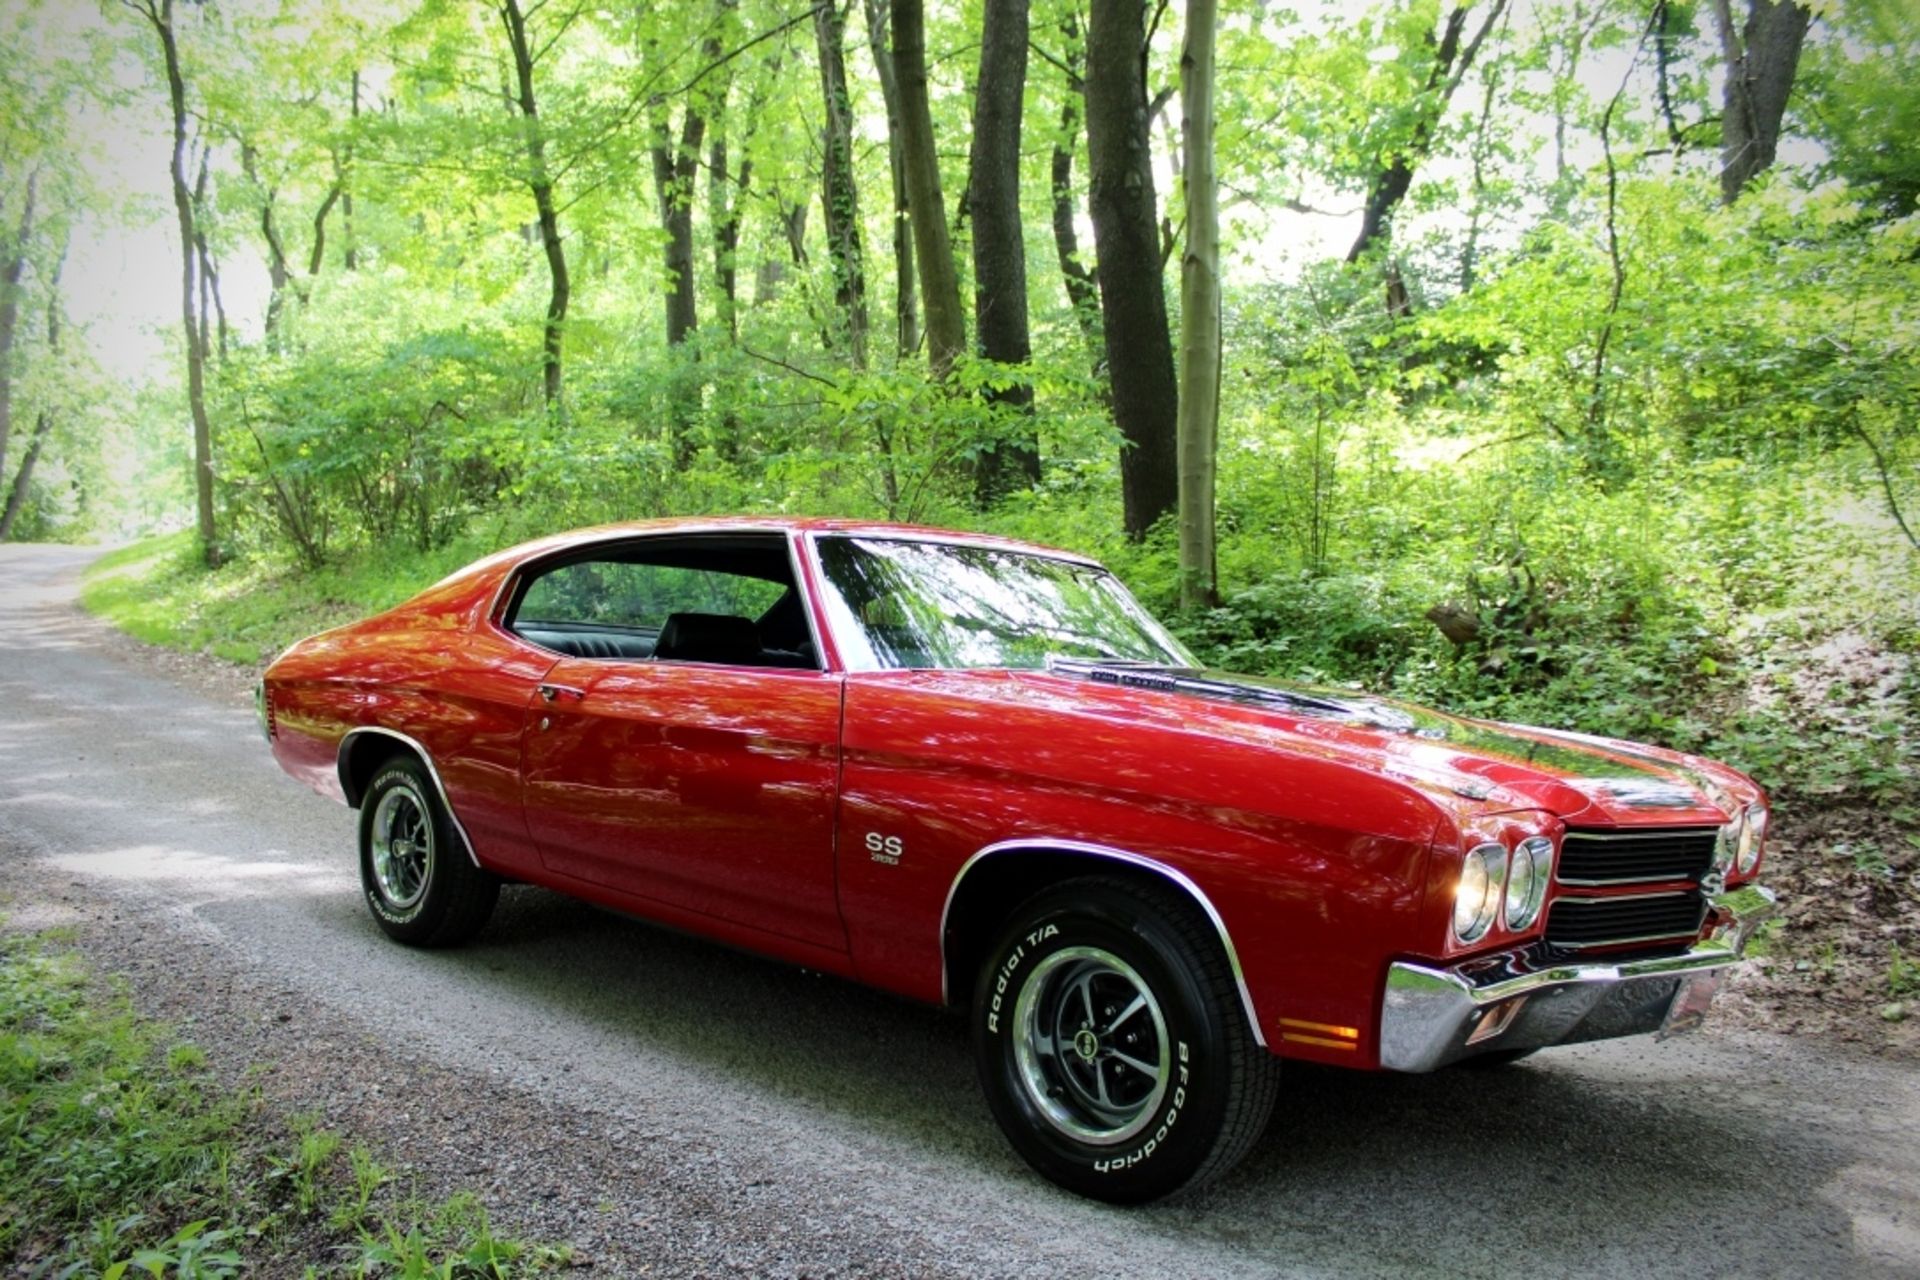 1970 Chevrolet Chevelle SS 396 coupe - Image 2 of 11